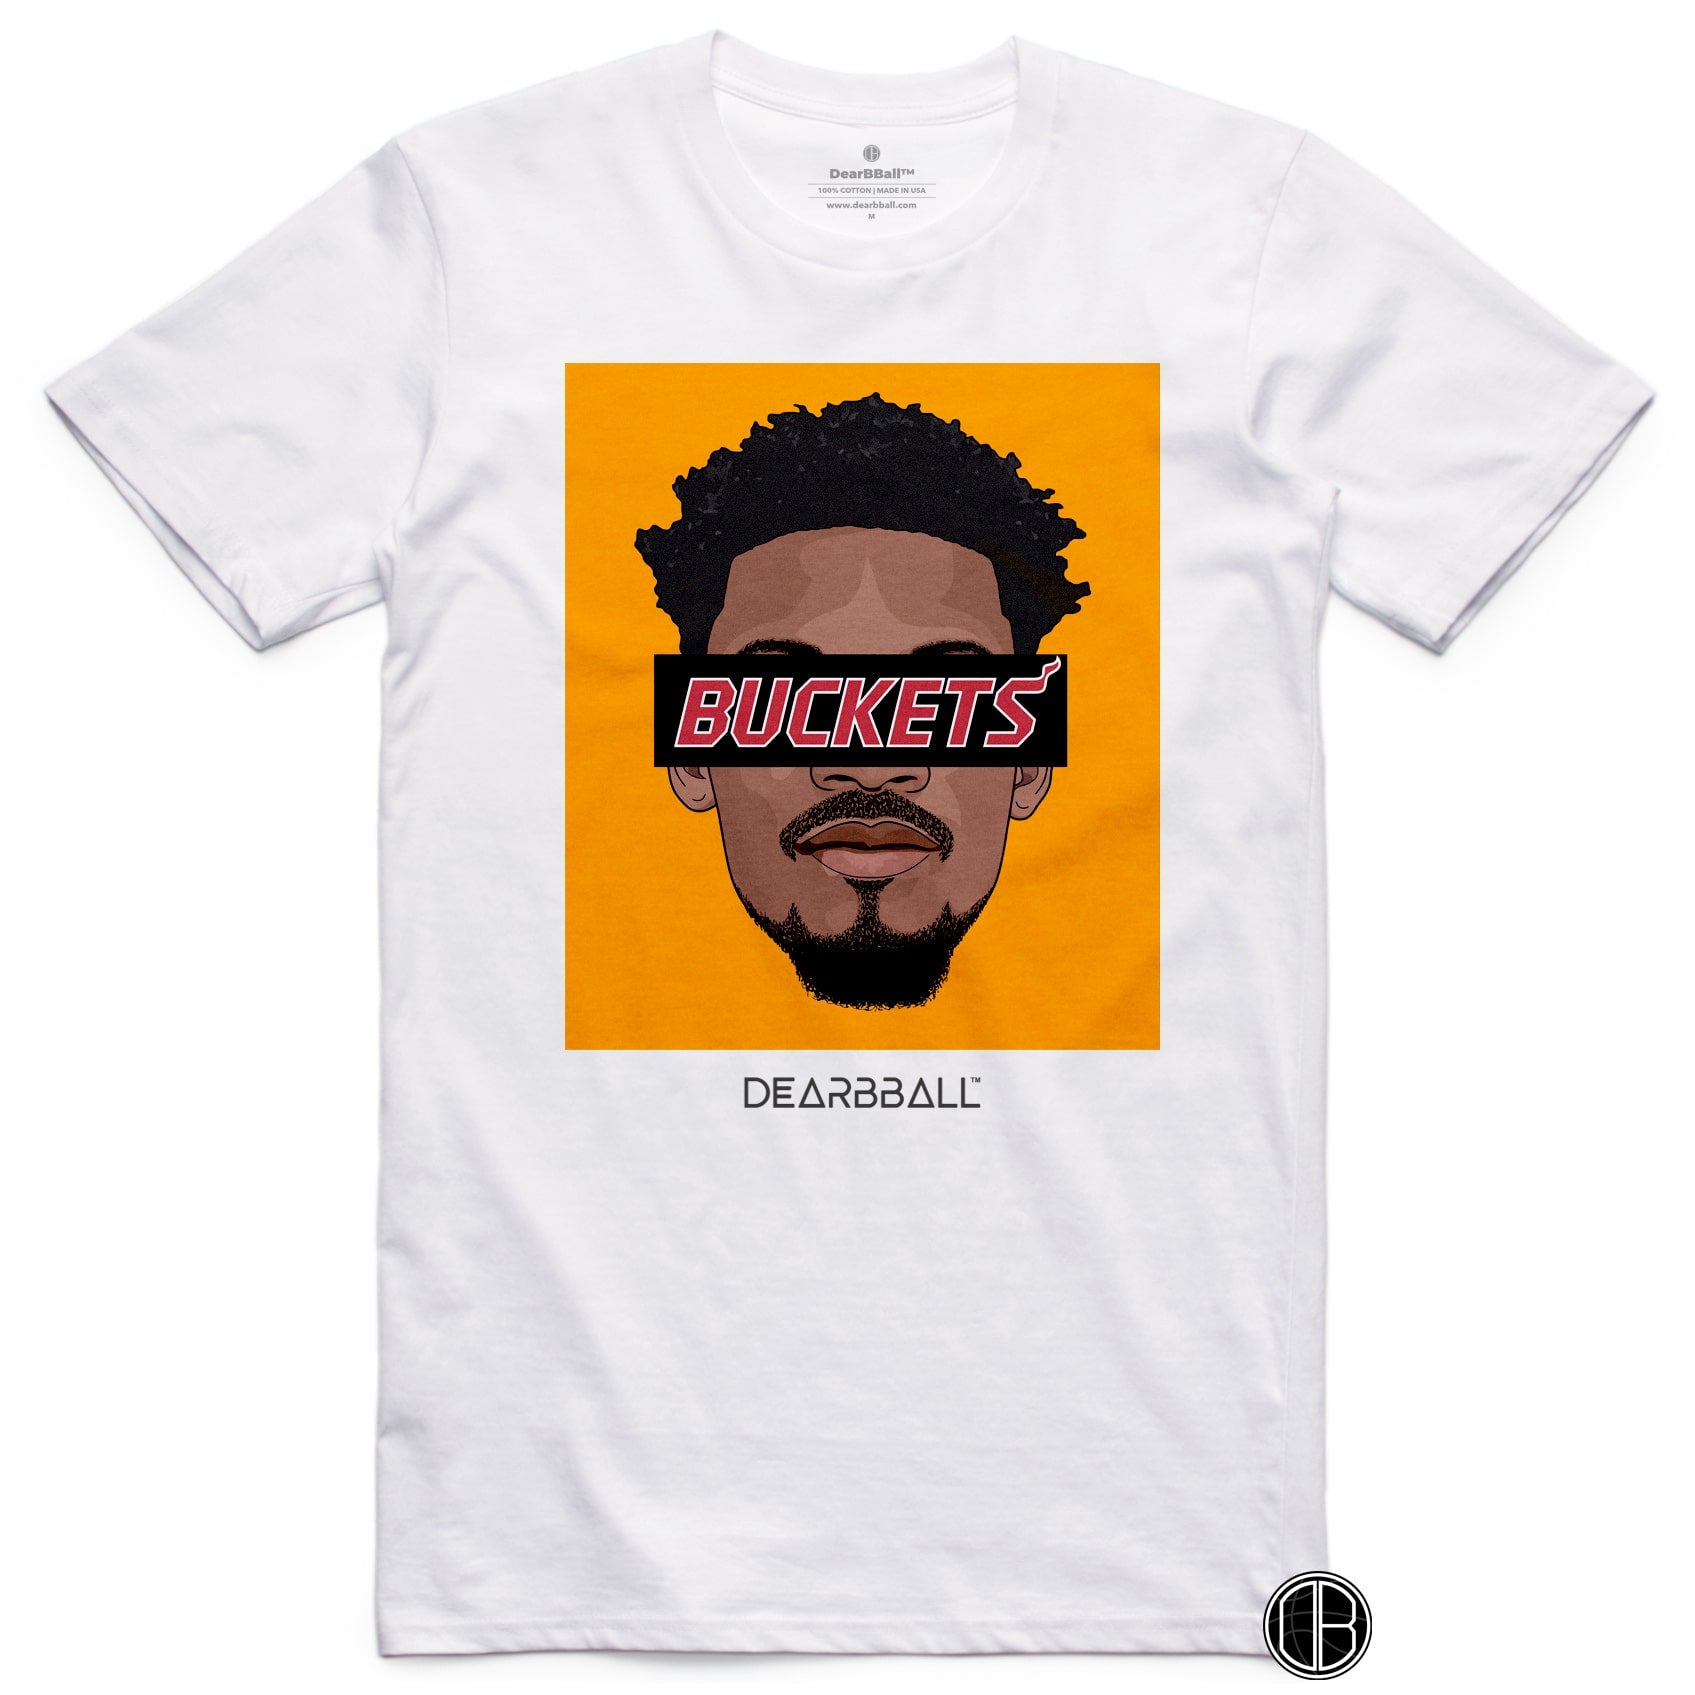 DearBBall T-Shirt - BUCKETS Miami Colors Edition